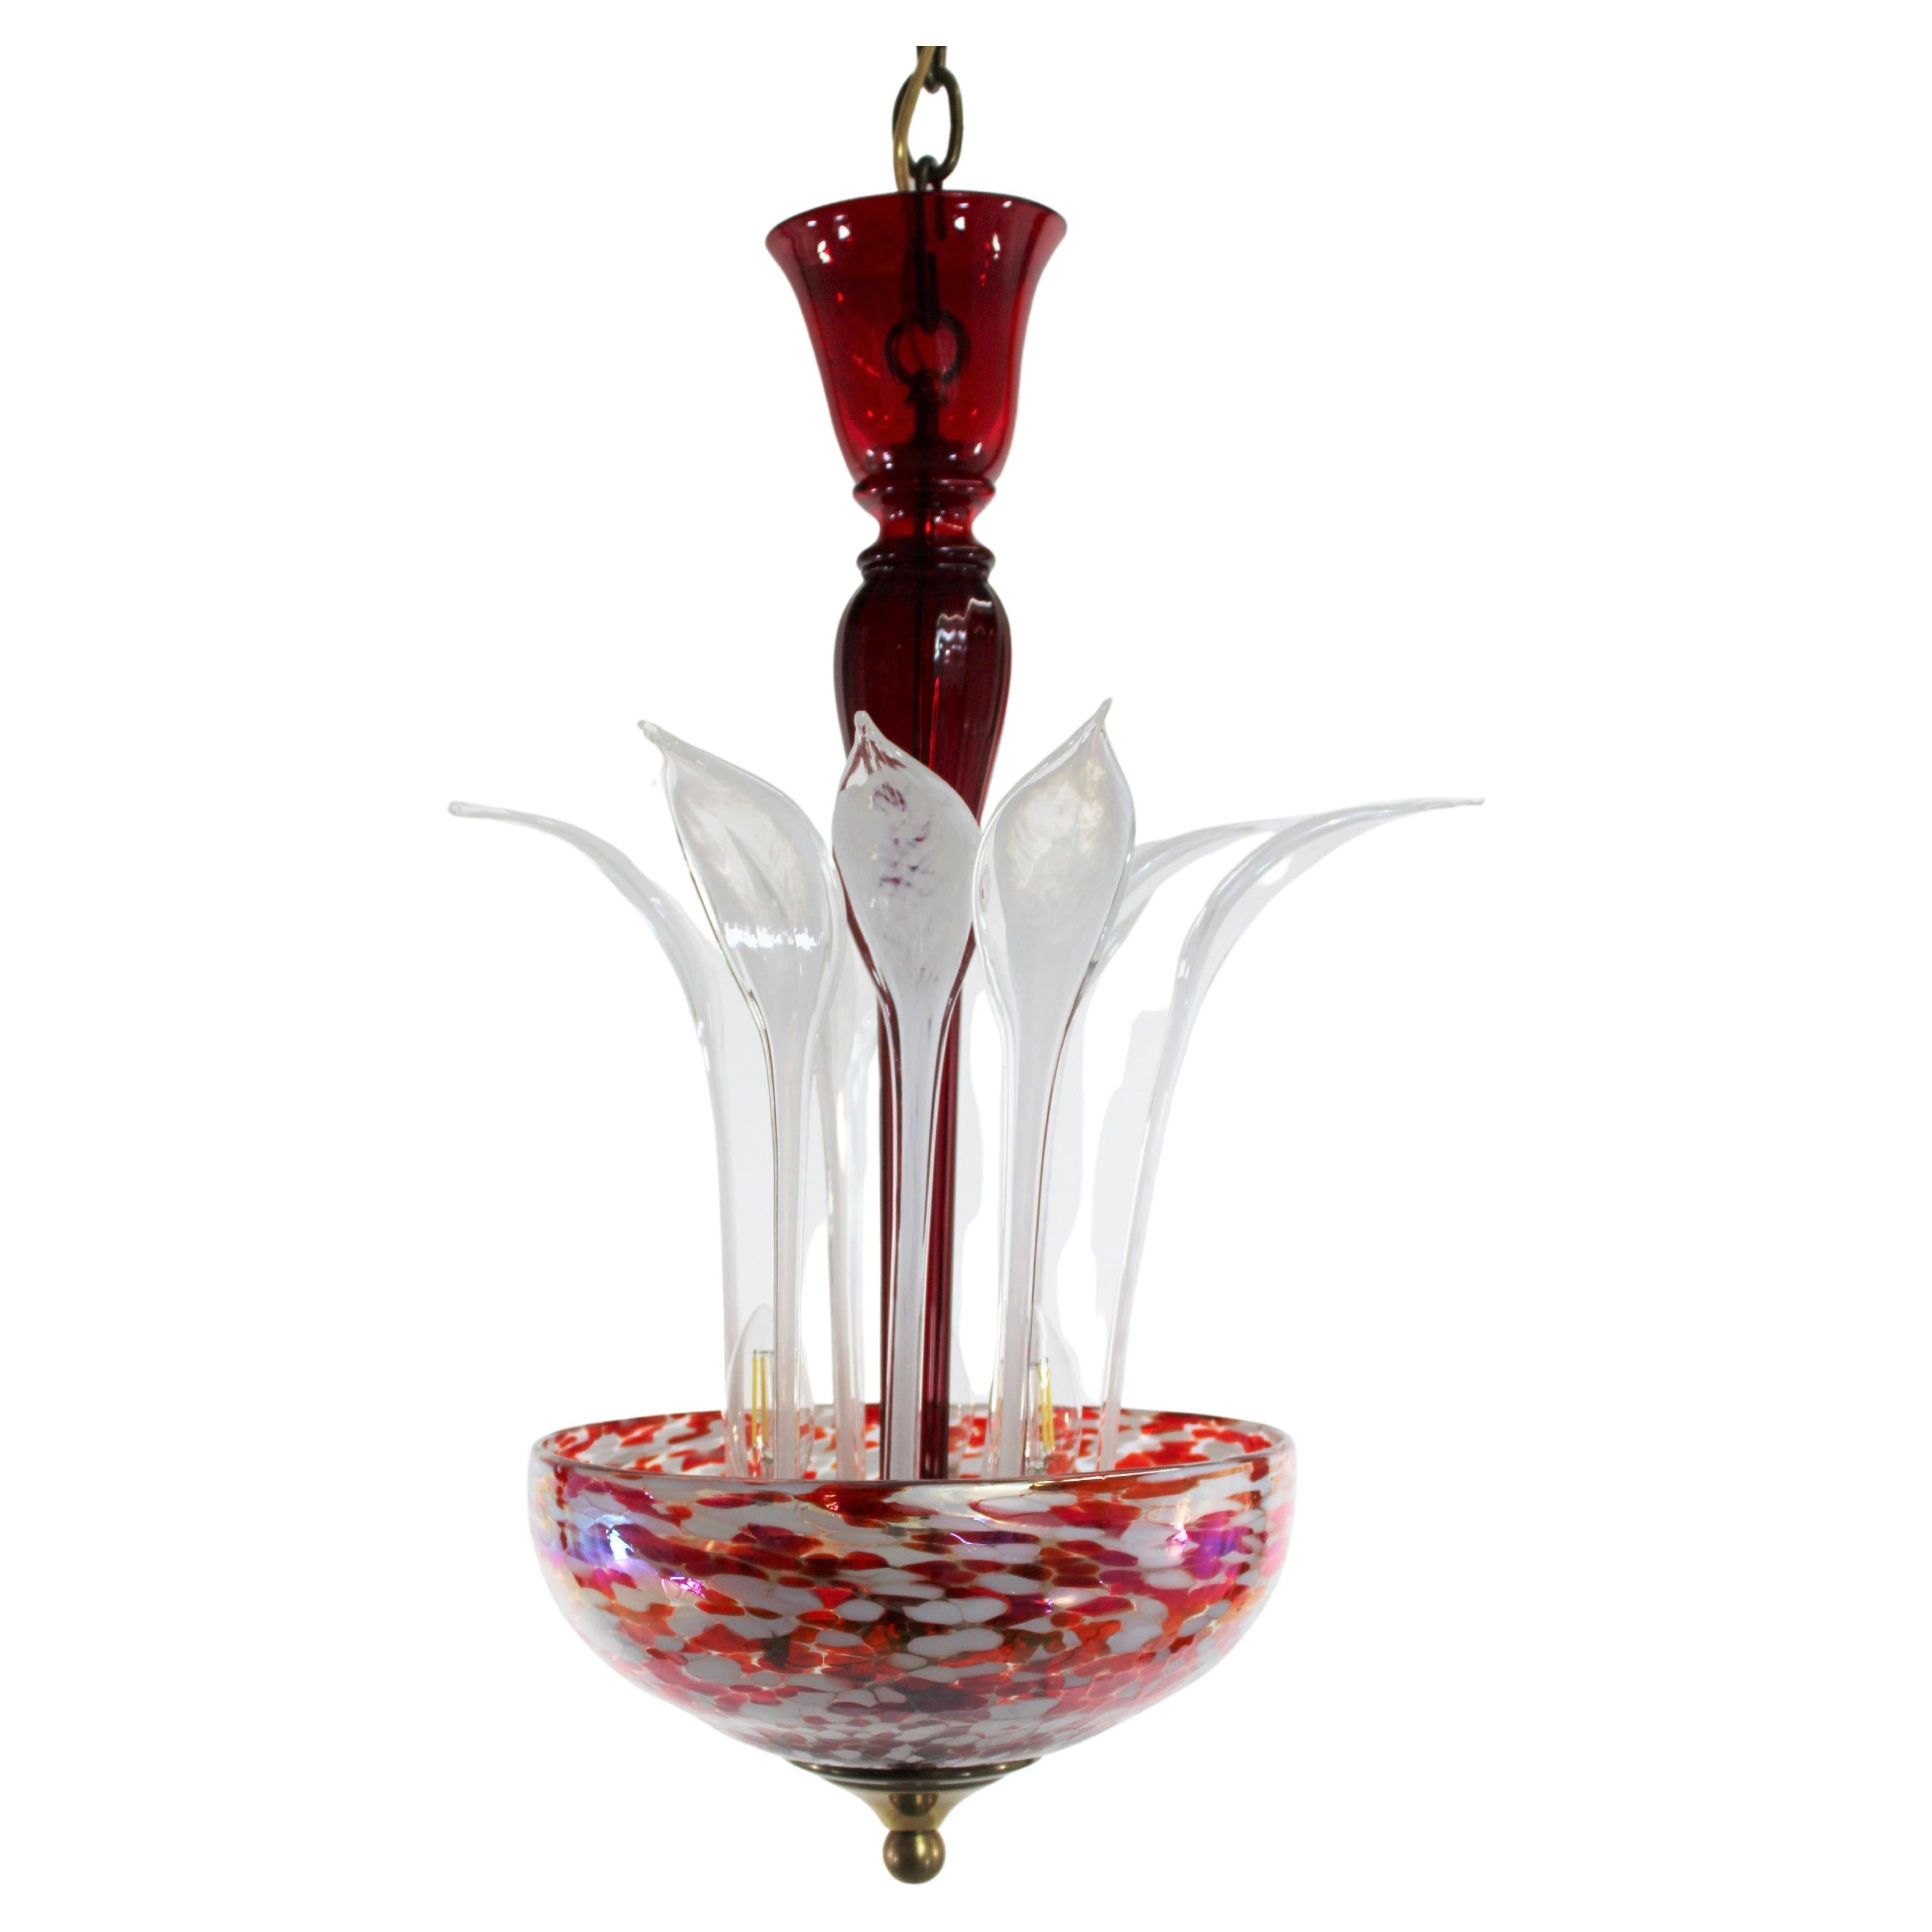  Modern Murrine Red and White Murano Chandelier For Sale